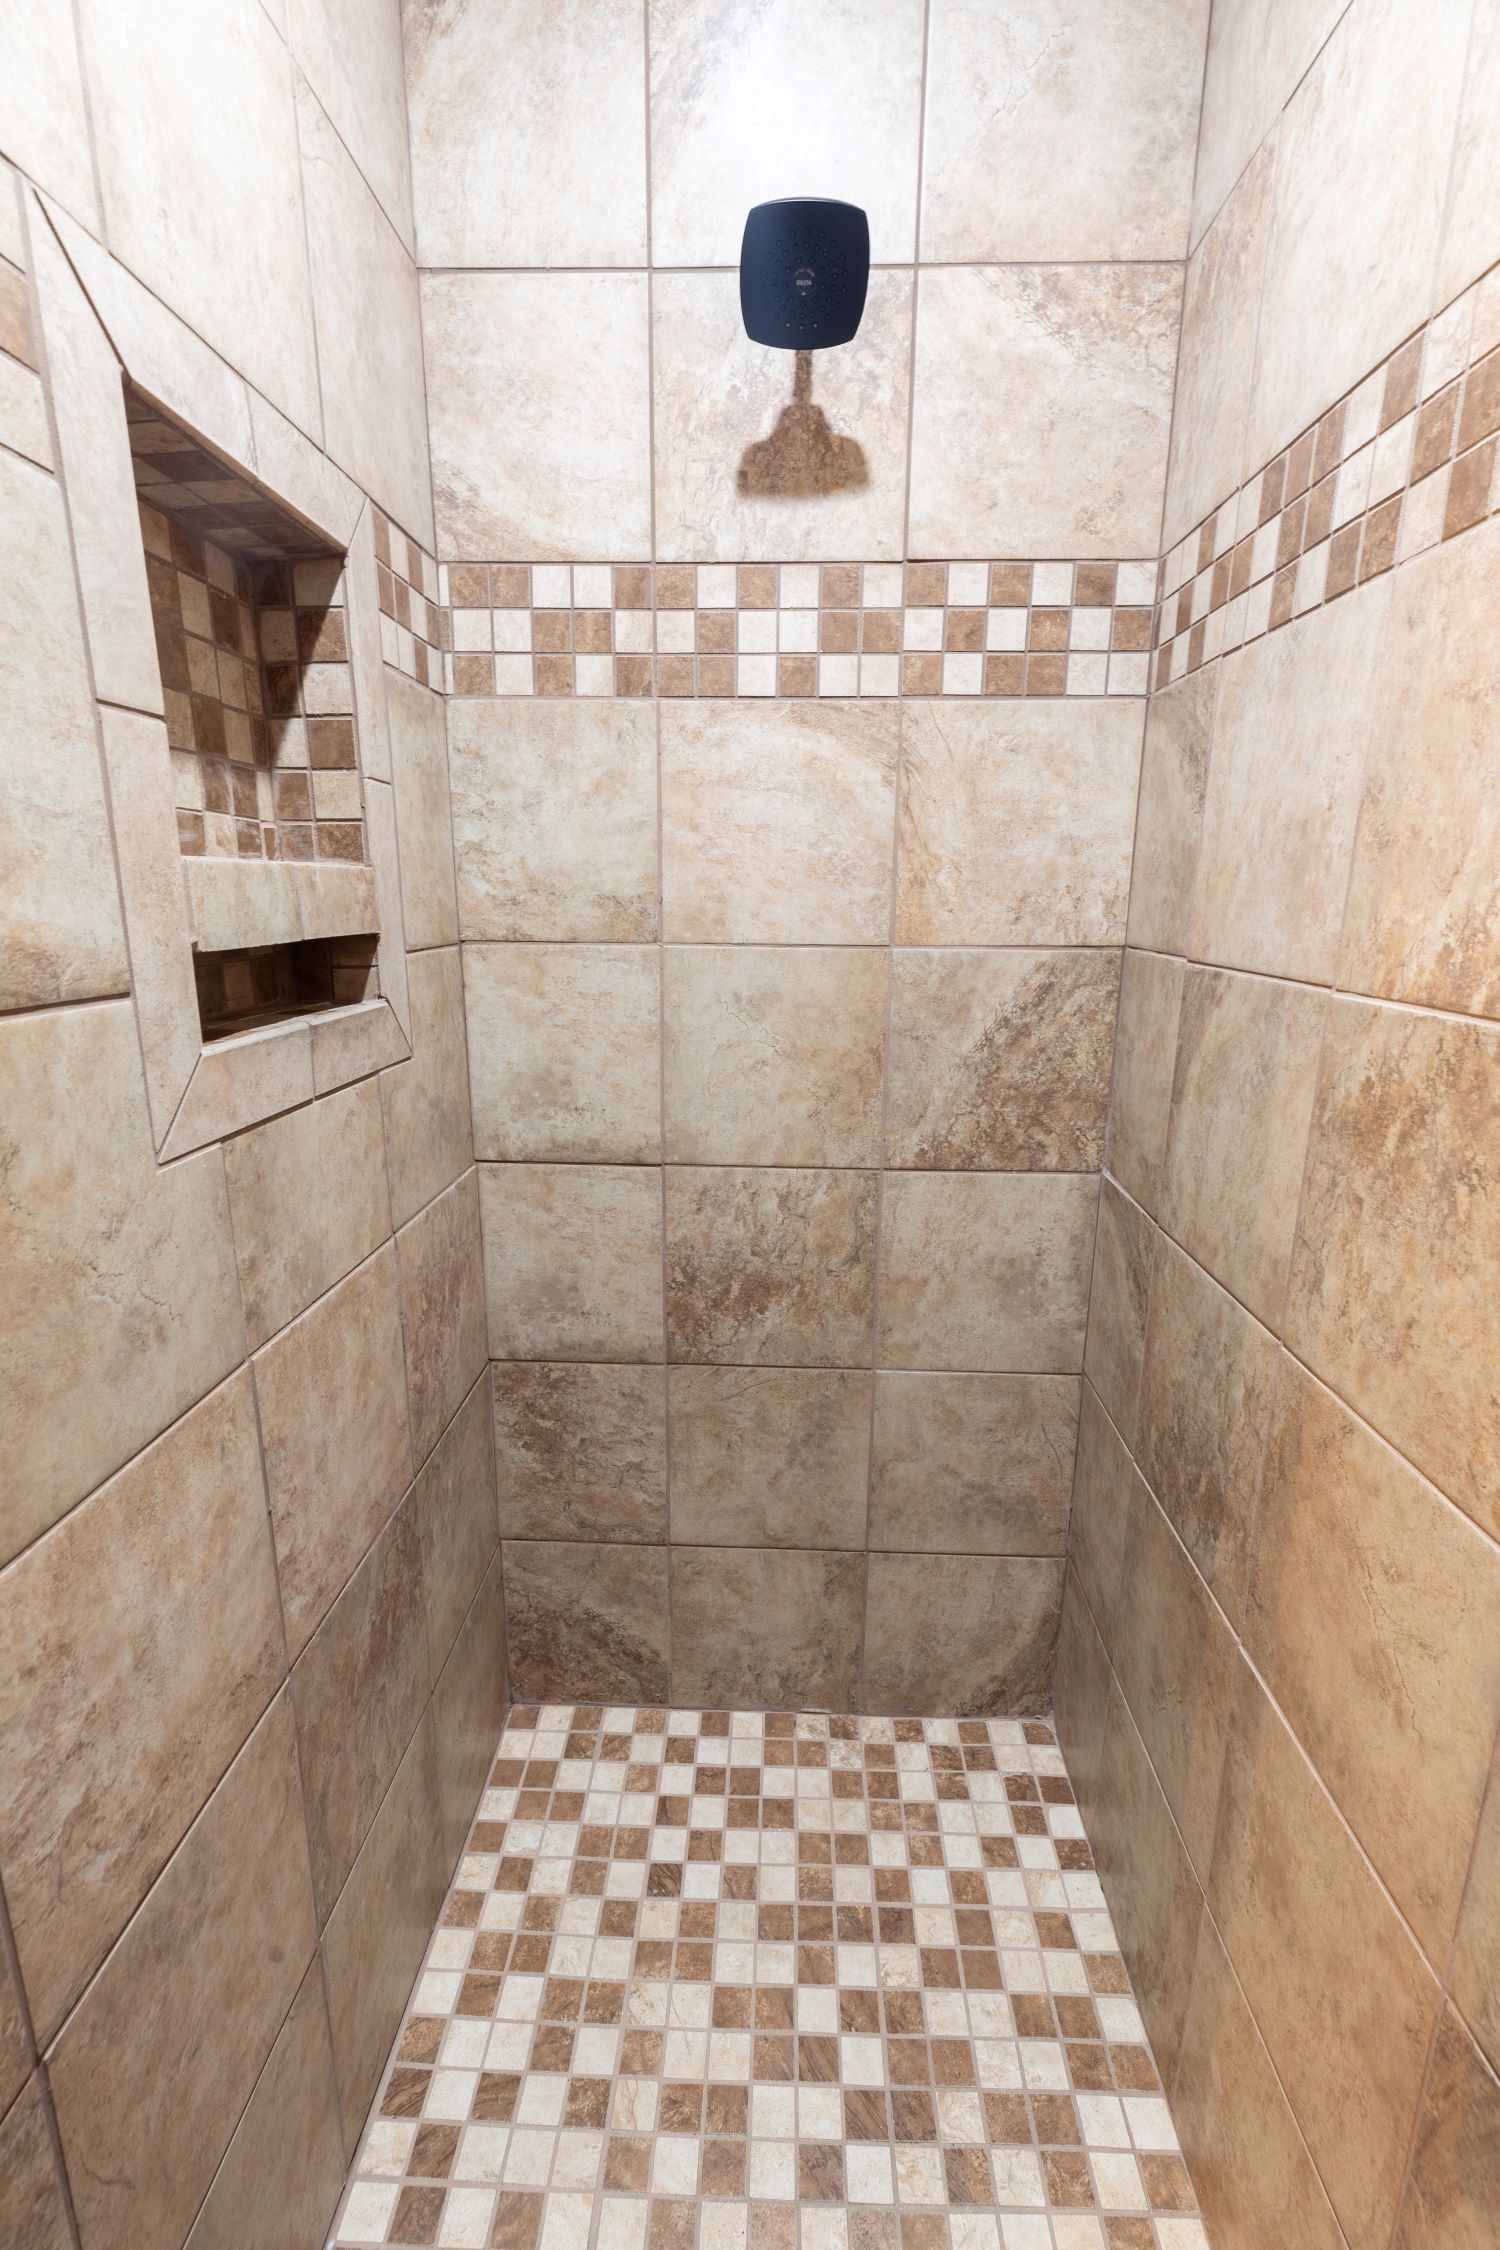 image of shower in small room at bunkhouse cabin